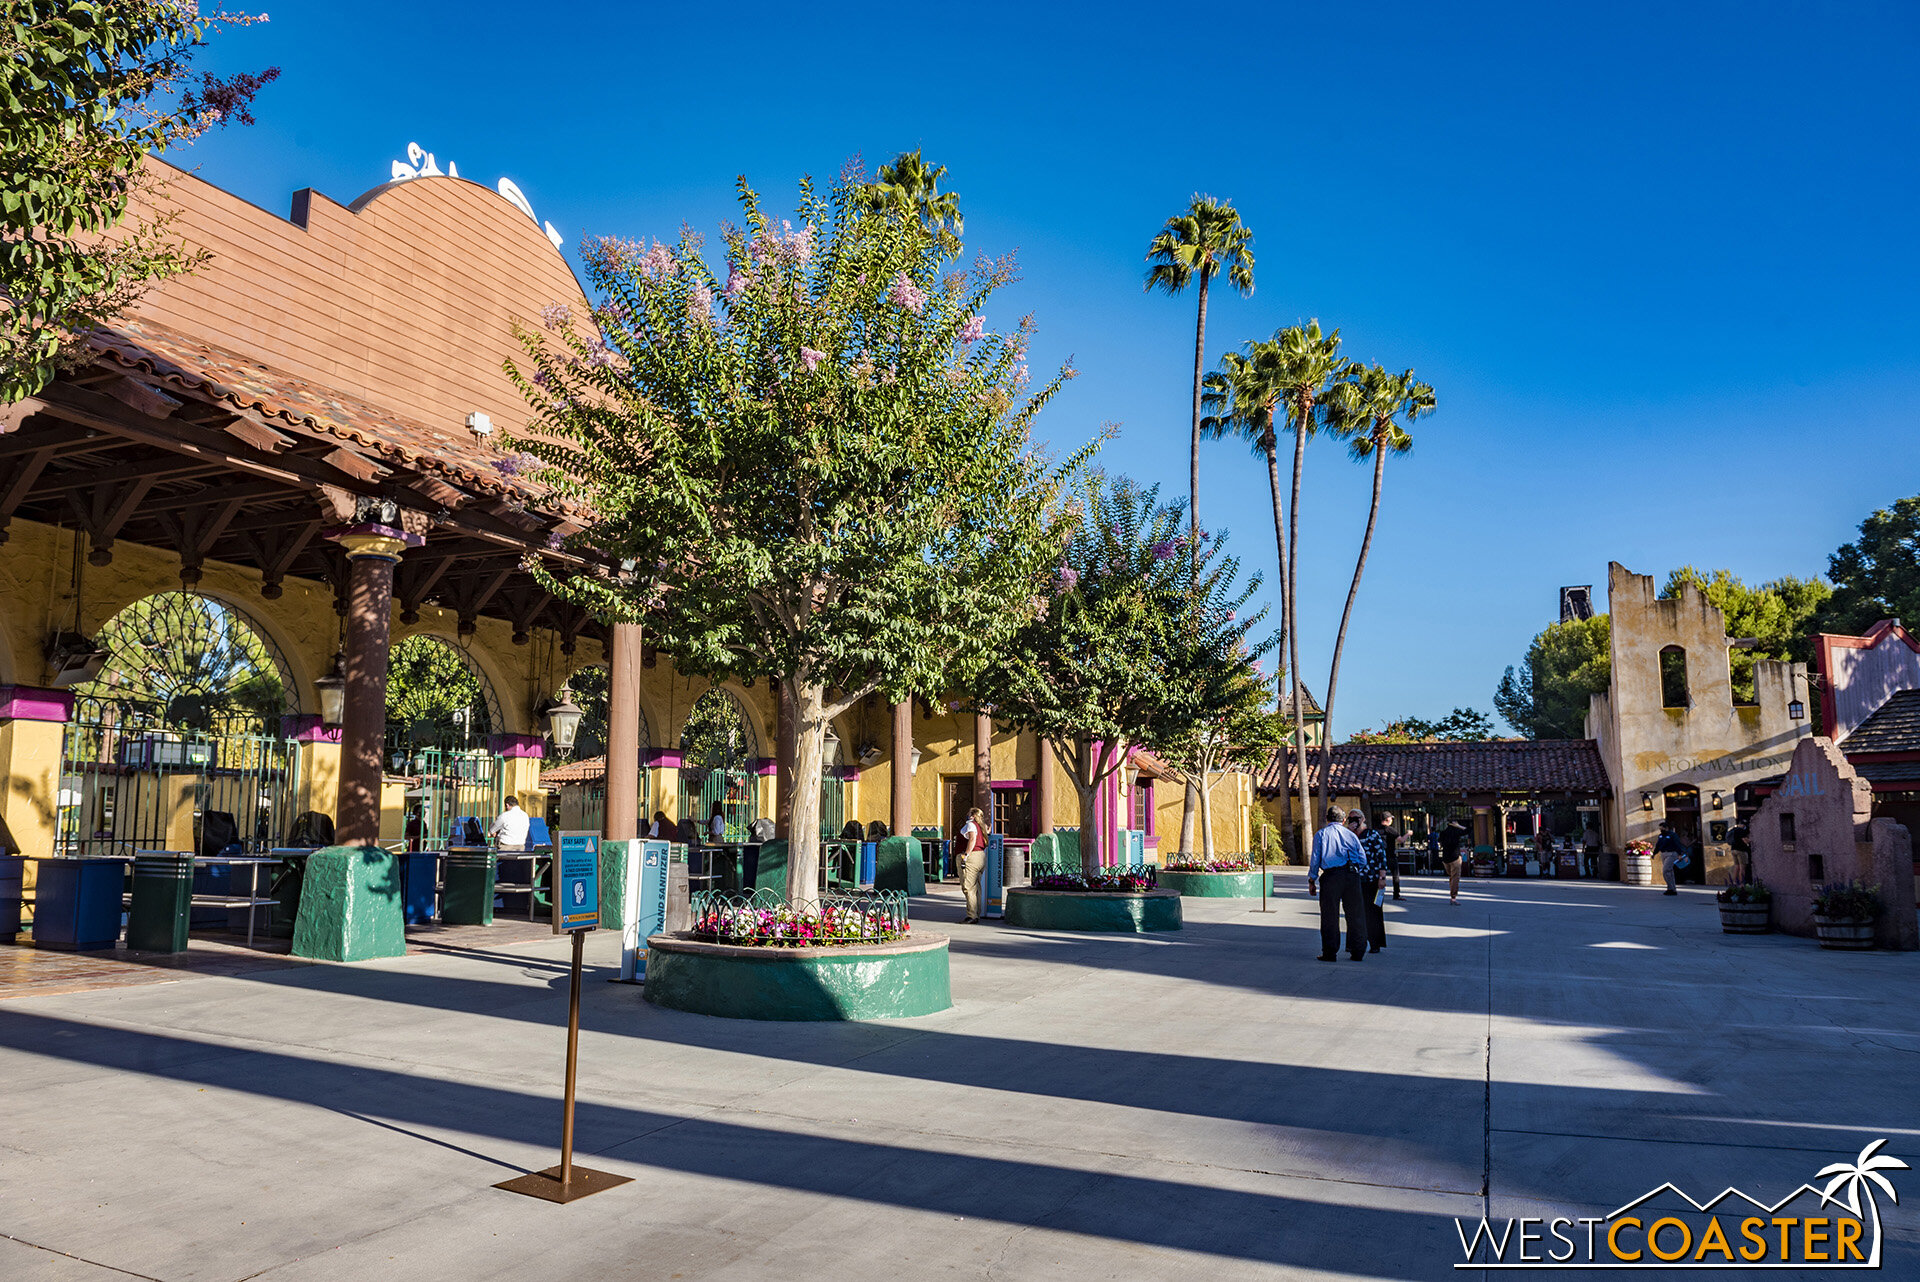  The following is an assortment of photos around Ghost Town and a bit of its adjacent areas to give a feel for the atmosphere of the park.  If you want to experience Knott’s on a very not-crowded day, this is definitely the chance to do so! 